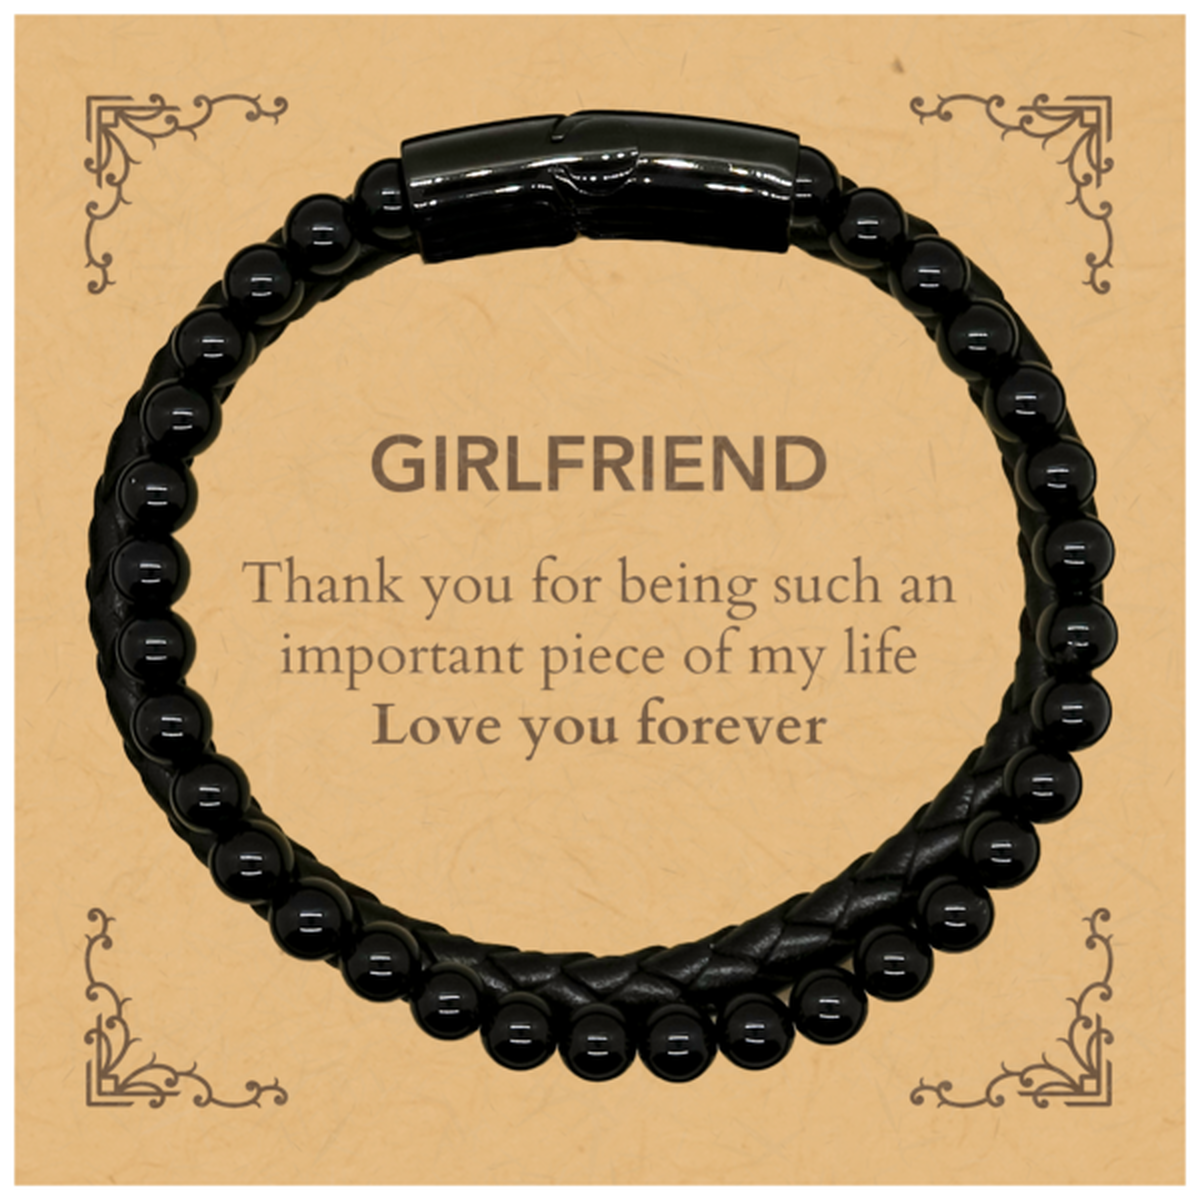 Appropriate Girlfriend Stone Leather Bracelets Epic Birthday Gifts for Girlfriend Thank you for being such an important piece of my life Girlfriend Christmas Mothers Fathers Day